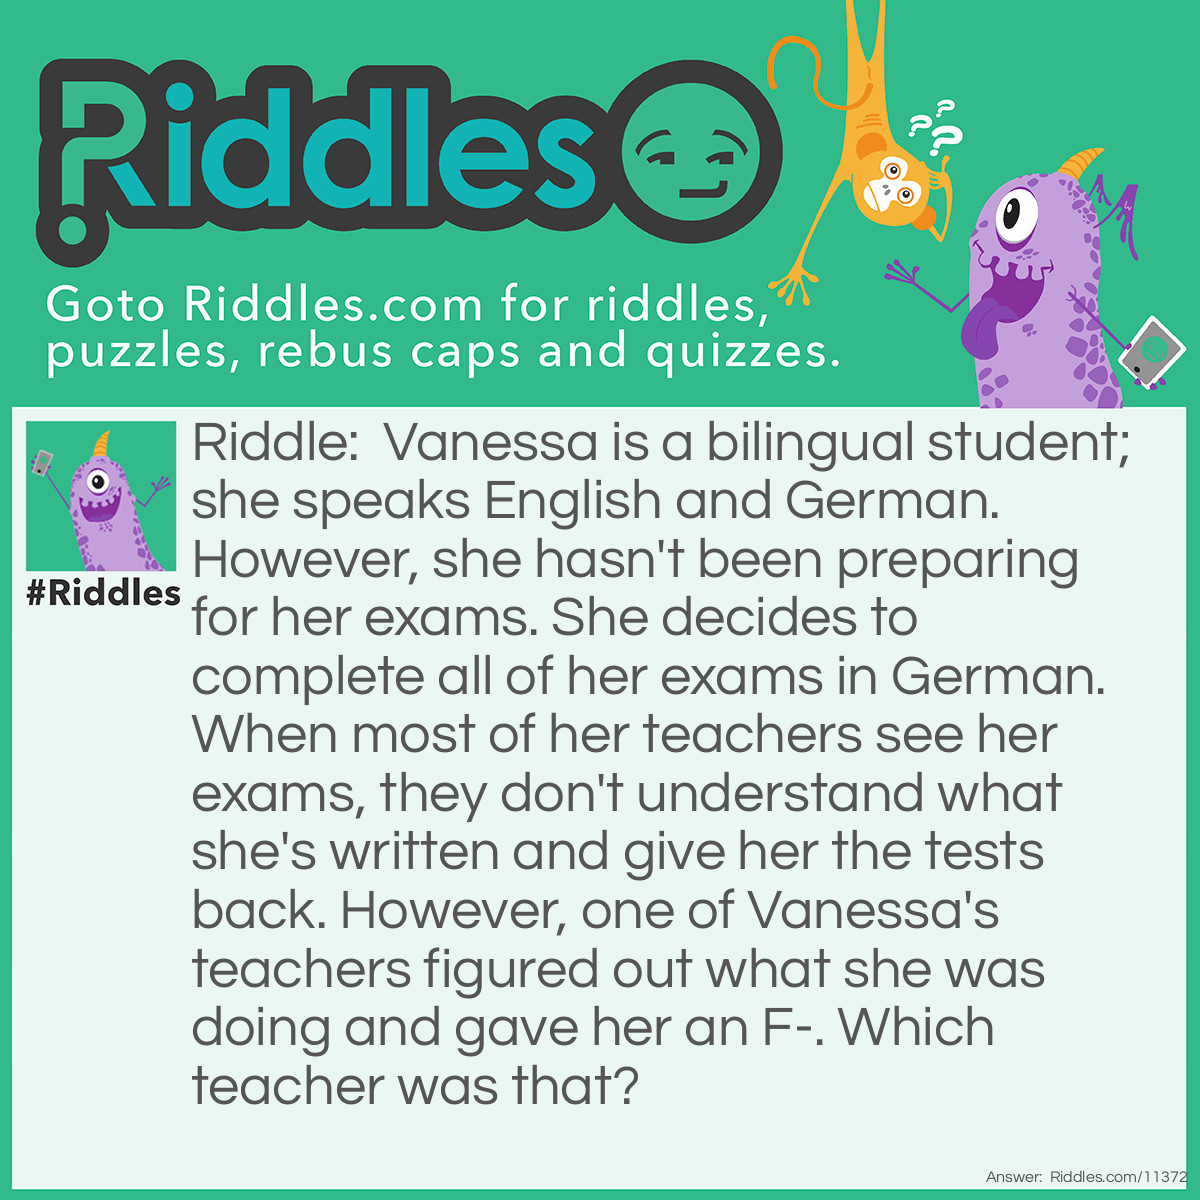 Riddle: Vanessa is a bilingual student; she speaks English and German. However, she hasn't been preparing for her exams. She decides to complete all of her exams in German. When most of her teachers see her exams, they don't understand what she's written and give her the tests back. However, one of Vanessa's teachers figured out what she was doing and gave her an F-. Which teacher was that? Answer: It was Vanessa's math teacher who failed her. Math is mostly numbers, so the girl's math teacher could understand everything and check the exam.